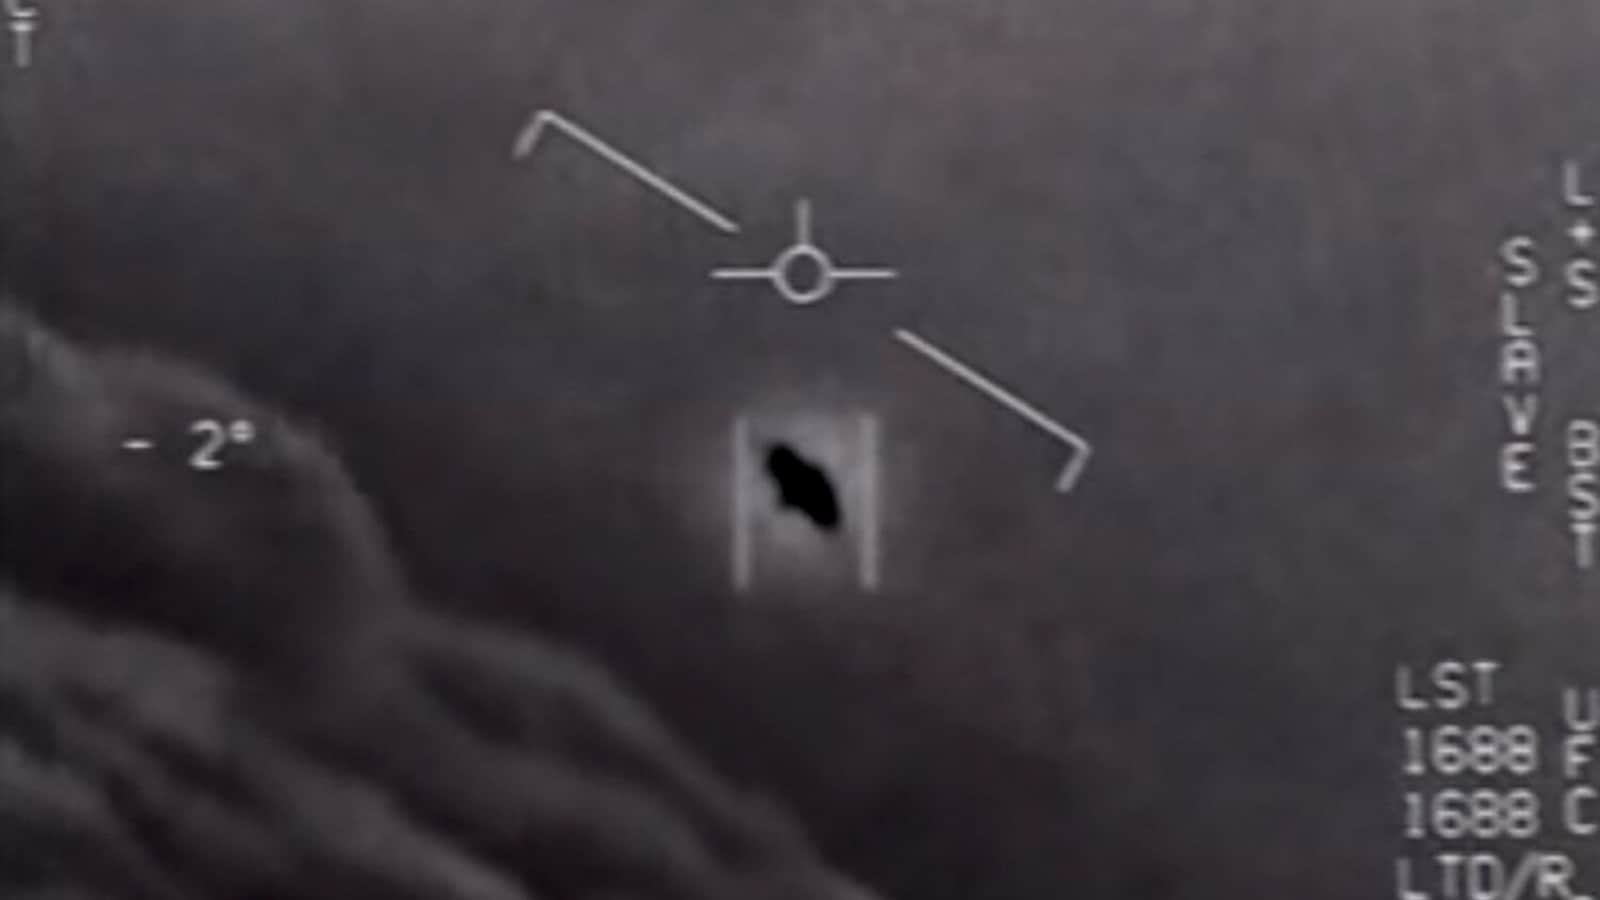 Documentary filmmaker releases video of ‘swarm of UFOs’ over US navy